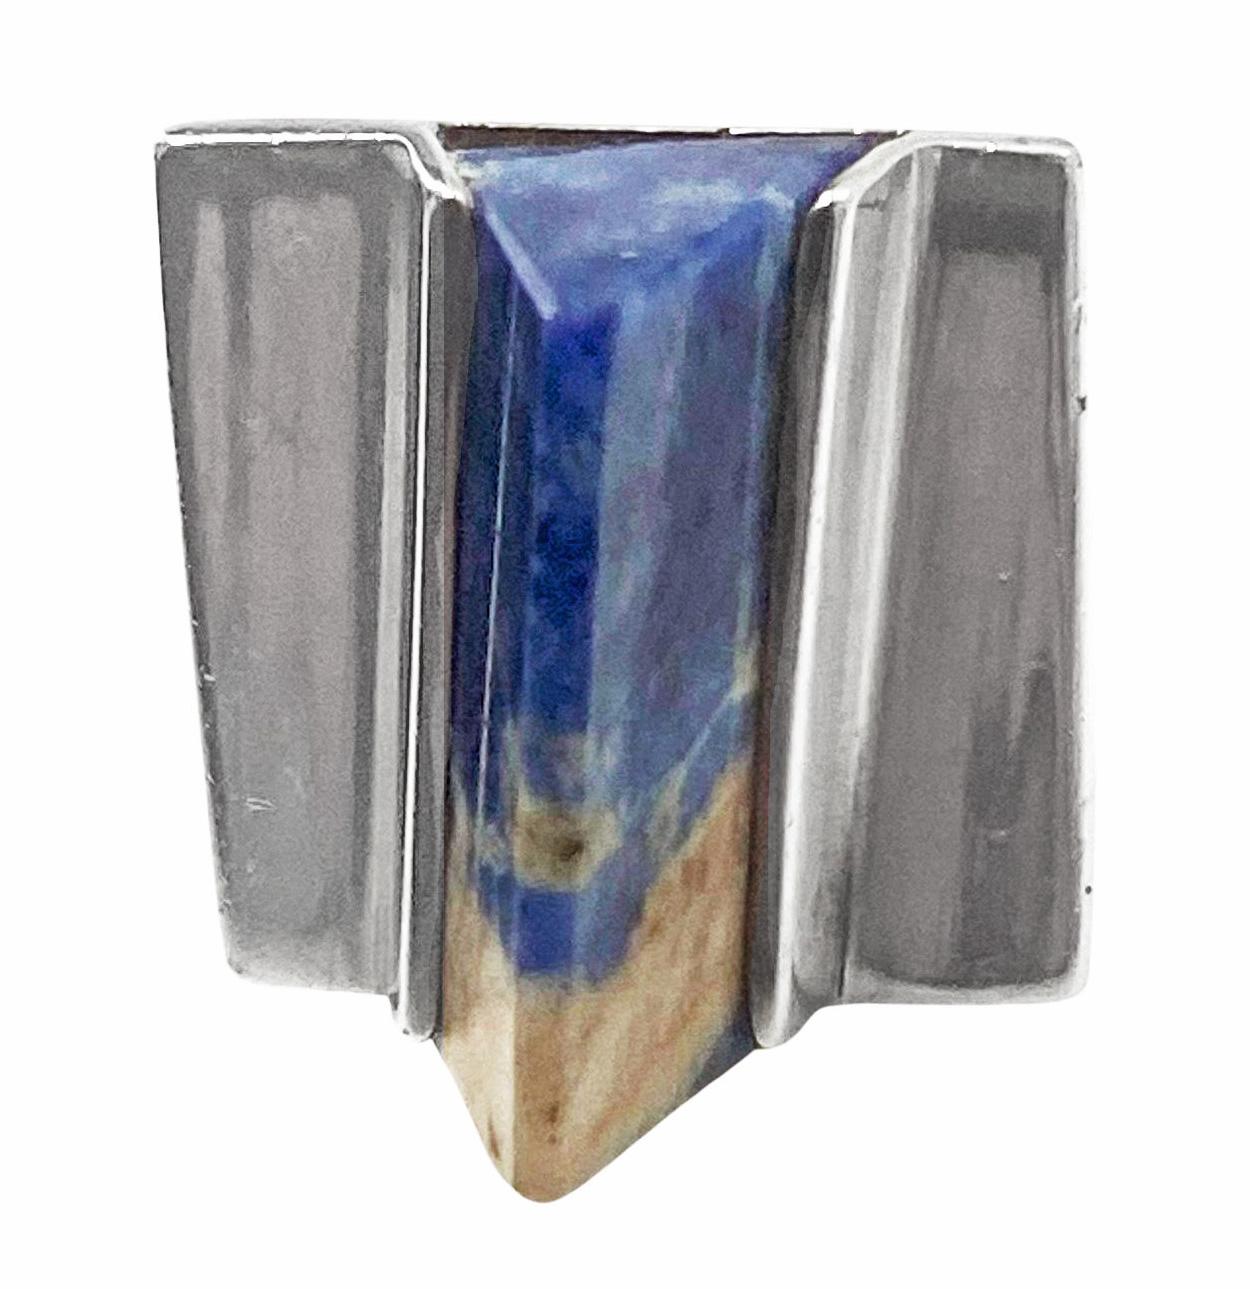 1970’s Sodalite and Sterling Ring. Centering on a five-sided triangular sodalite, within a square-shaped silver mount. Sodalite measuring approximately 21.4 x 8.5 x 12.3 mm. Size 6. Full English hallmarks for London 1970 J & P MMD. Magnus Maximus